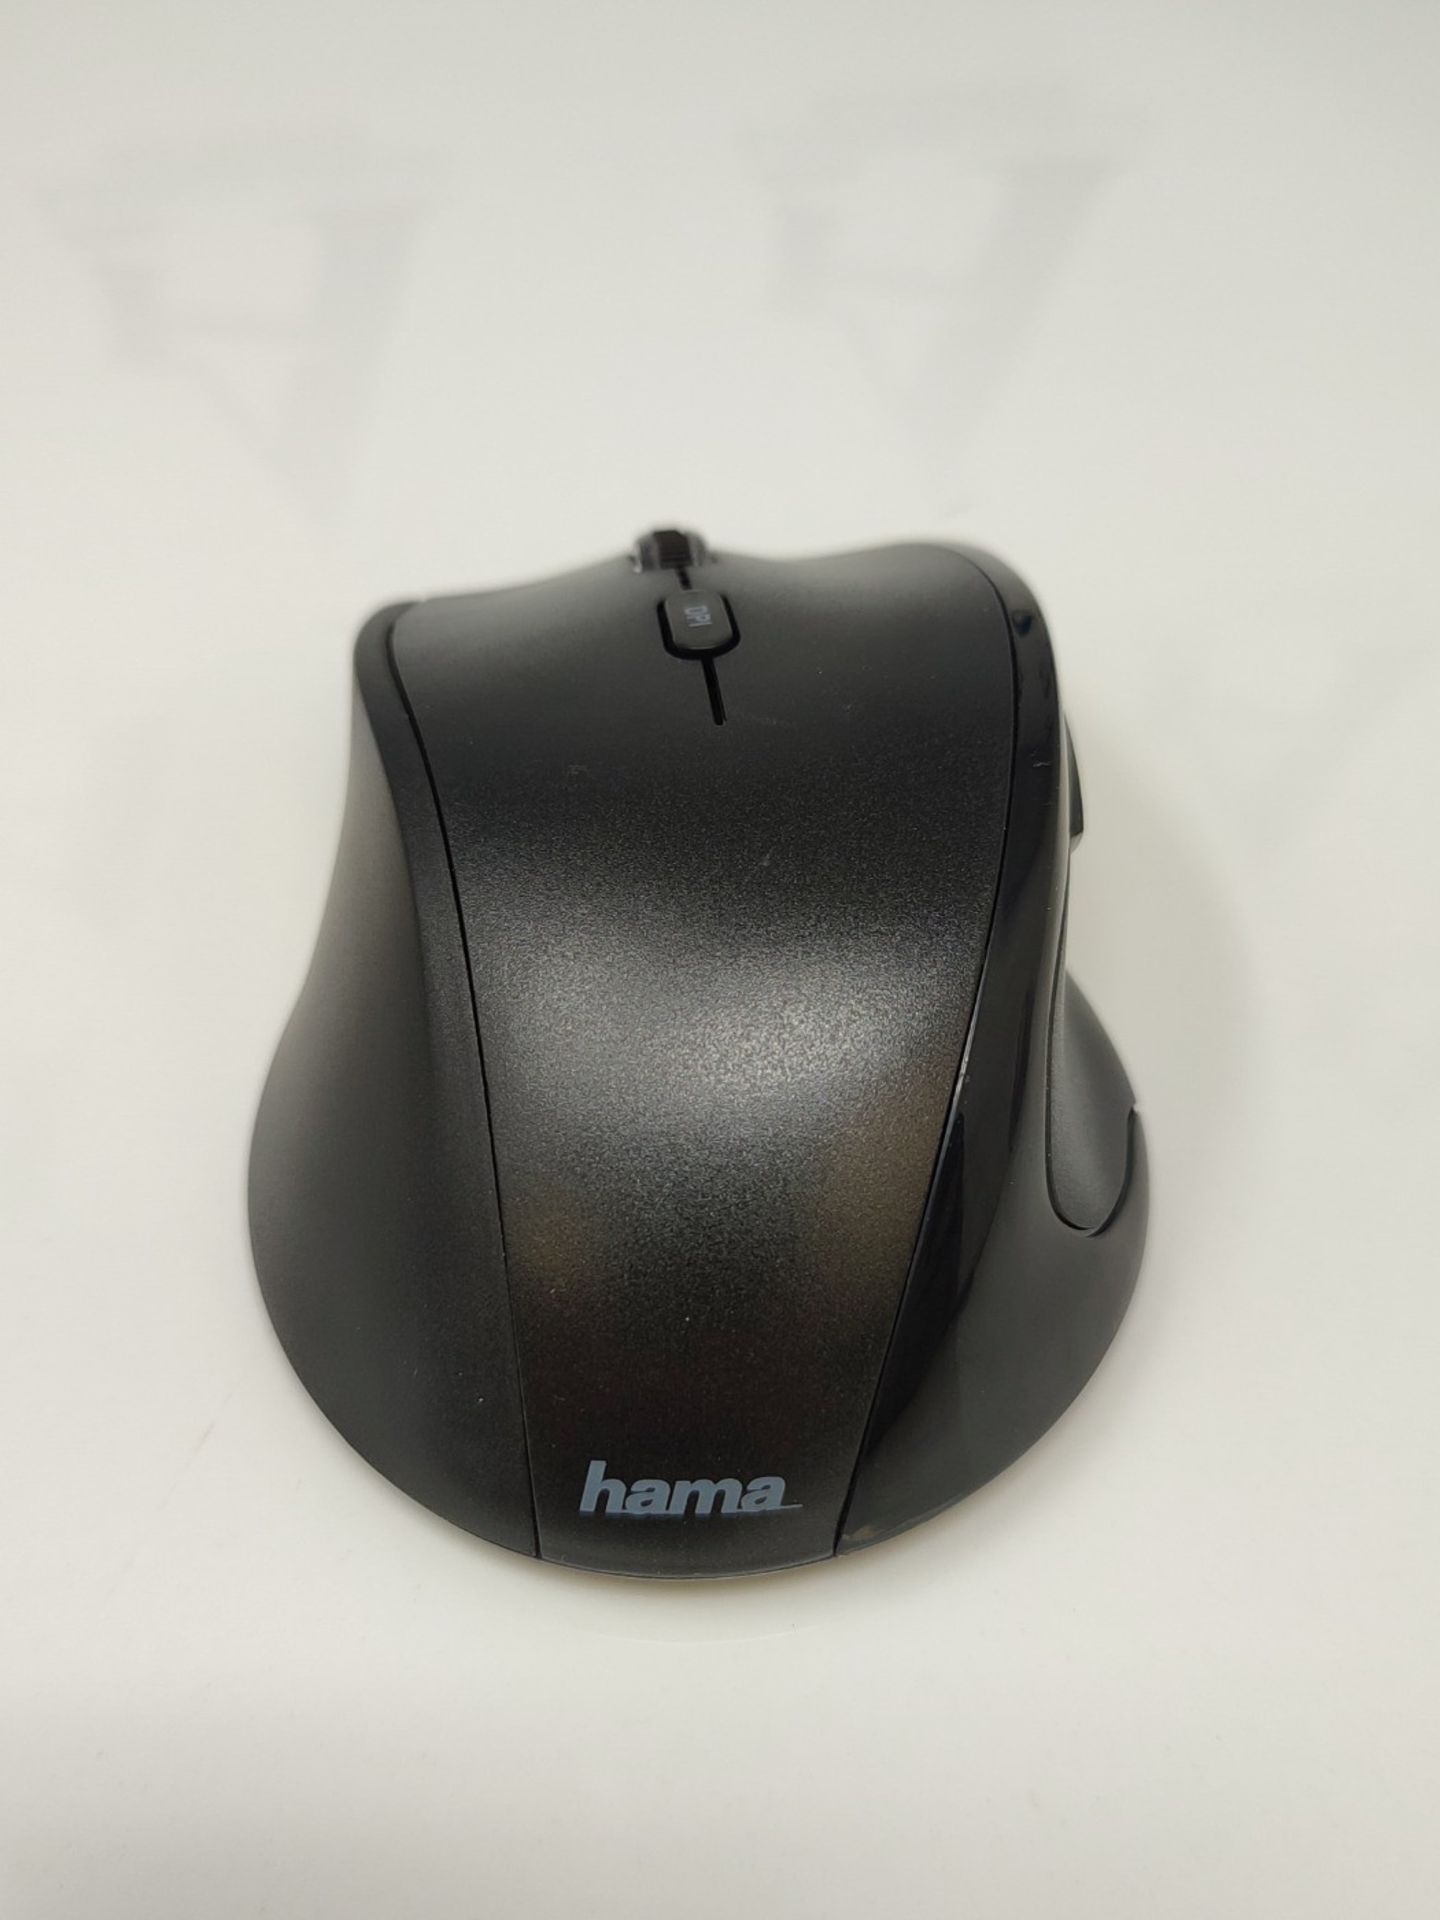 [INCOMPLETE] Hama wireless mouse for left-handers ergonomic (left-handed mouse without - Image 3 of 3